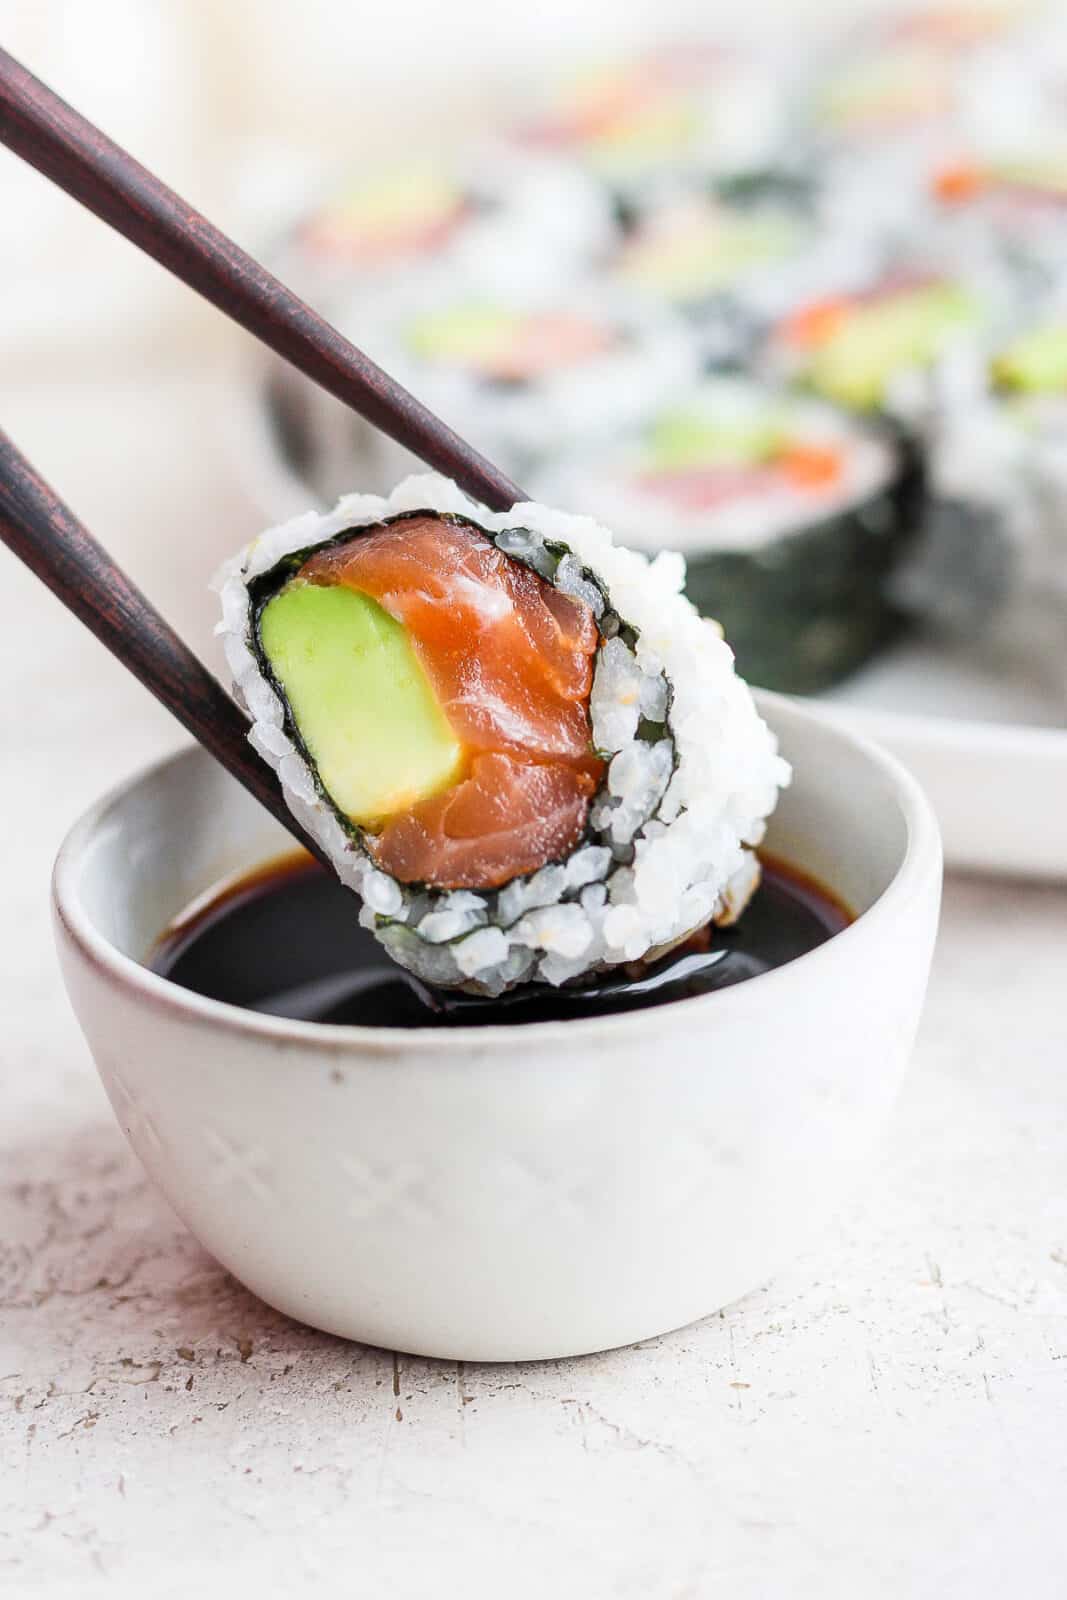 Chopsticks dipping a sushi roll in a dish of soy sauce.